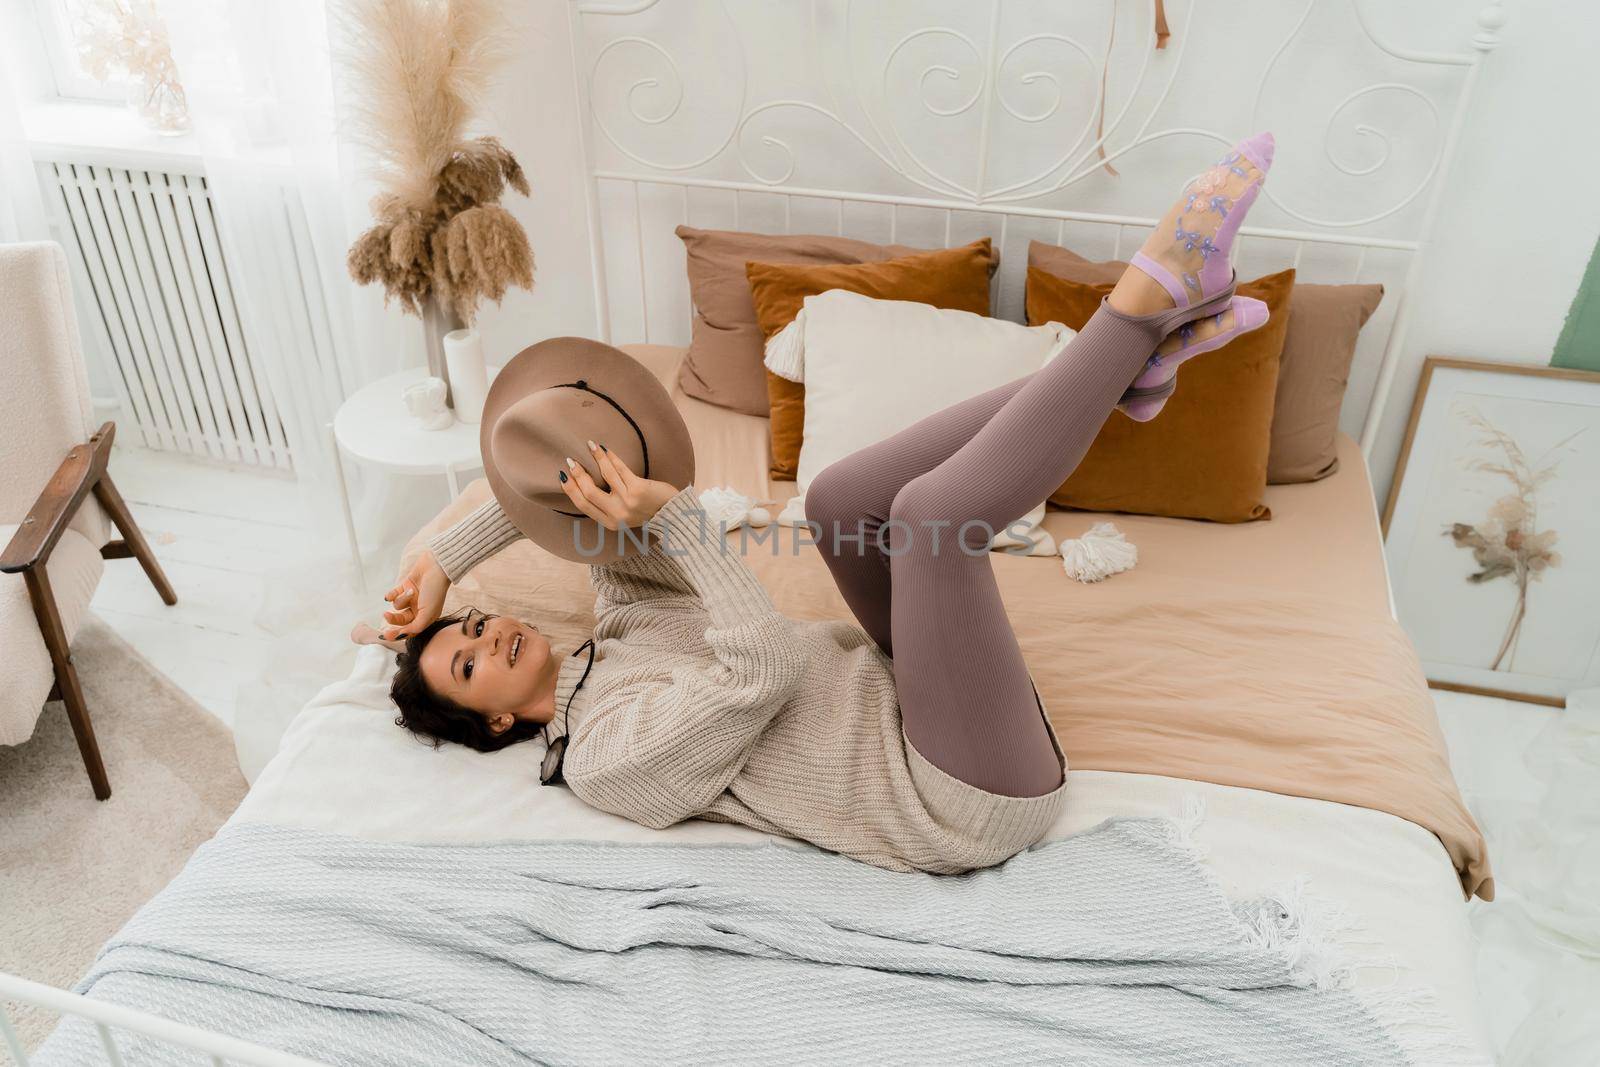 Lifestyle concept. A young middle-aged woman in a sweater lies on the bed and laughs, holds a brown hat in her hands